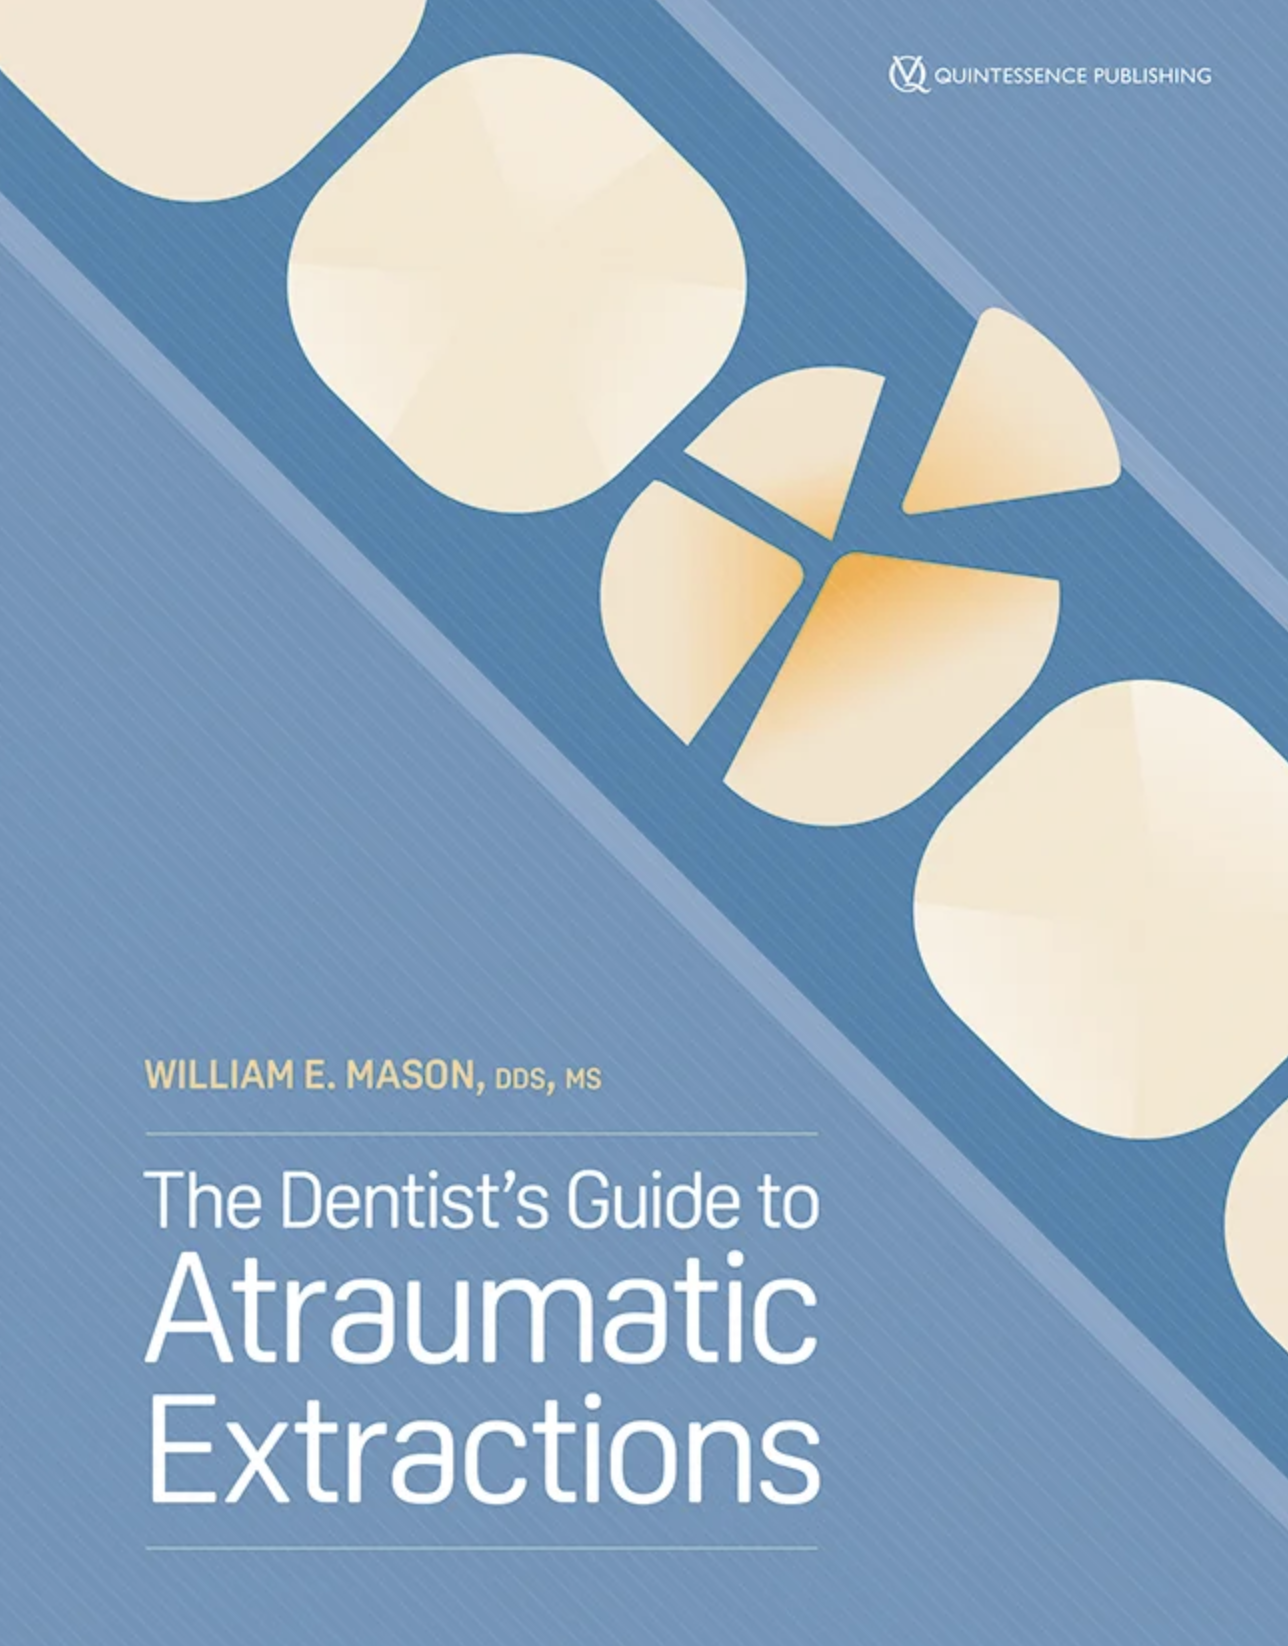 The Dentist's Guide to Atraumatic Extractions